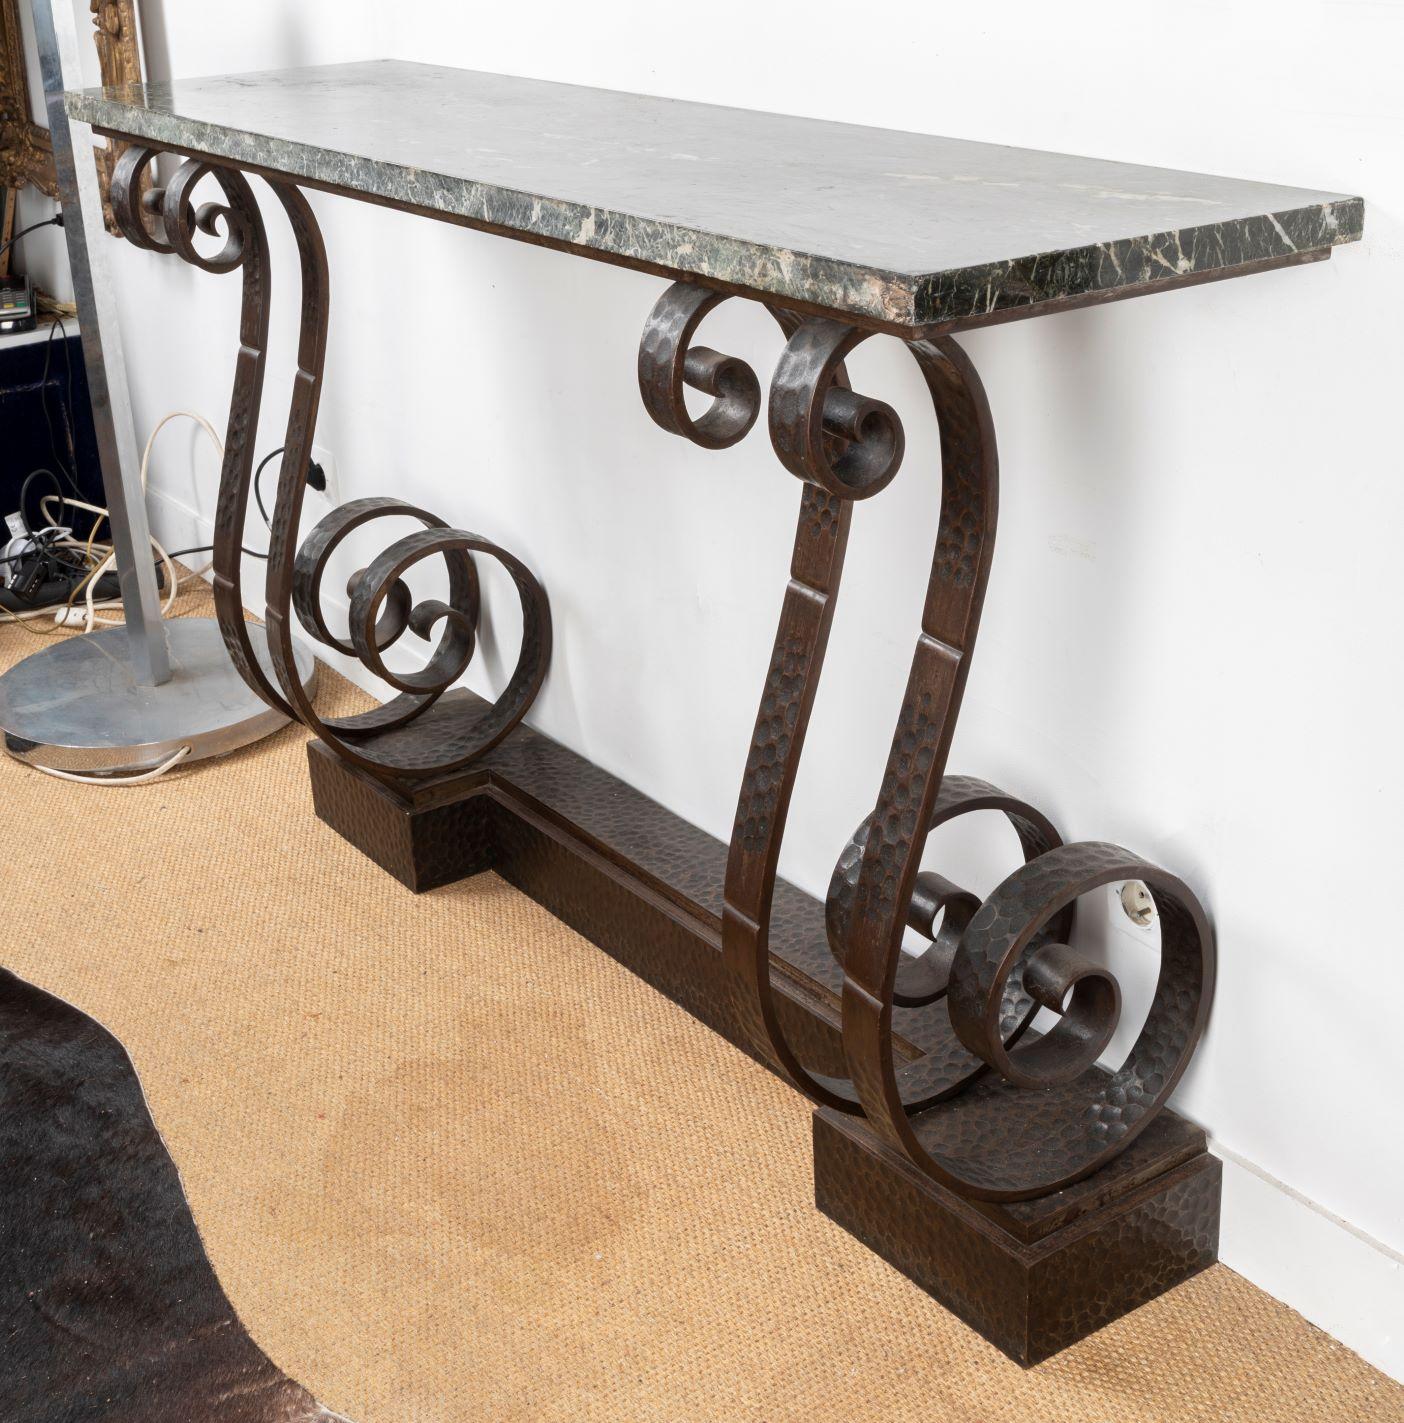 Spectacular Hammered Wroughtiron Art Deco Console Table, attributed to Edgard Brandt (1880 - 1960) , France 1930's
with dark grey marble top

It was in 1902 that Edgard Brandt created in Paris, at 76, rue Michel-Ange, the Brandt establishments